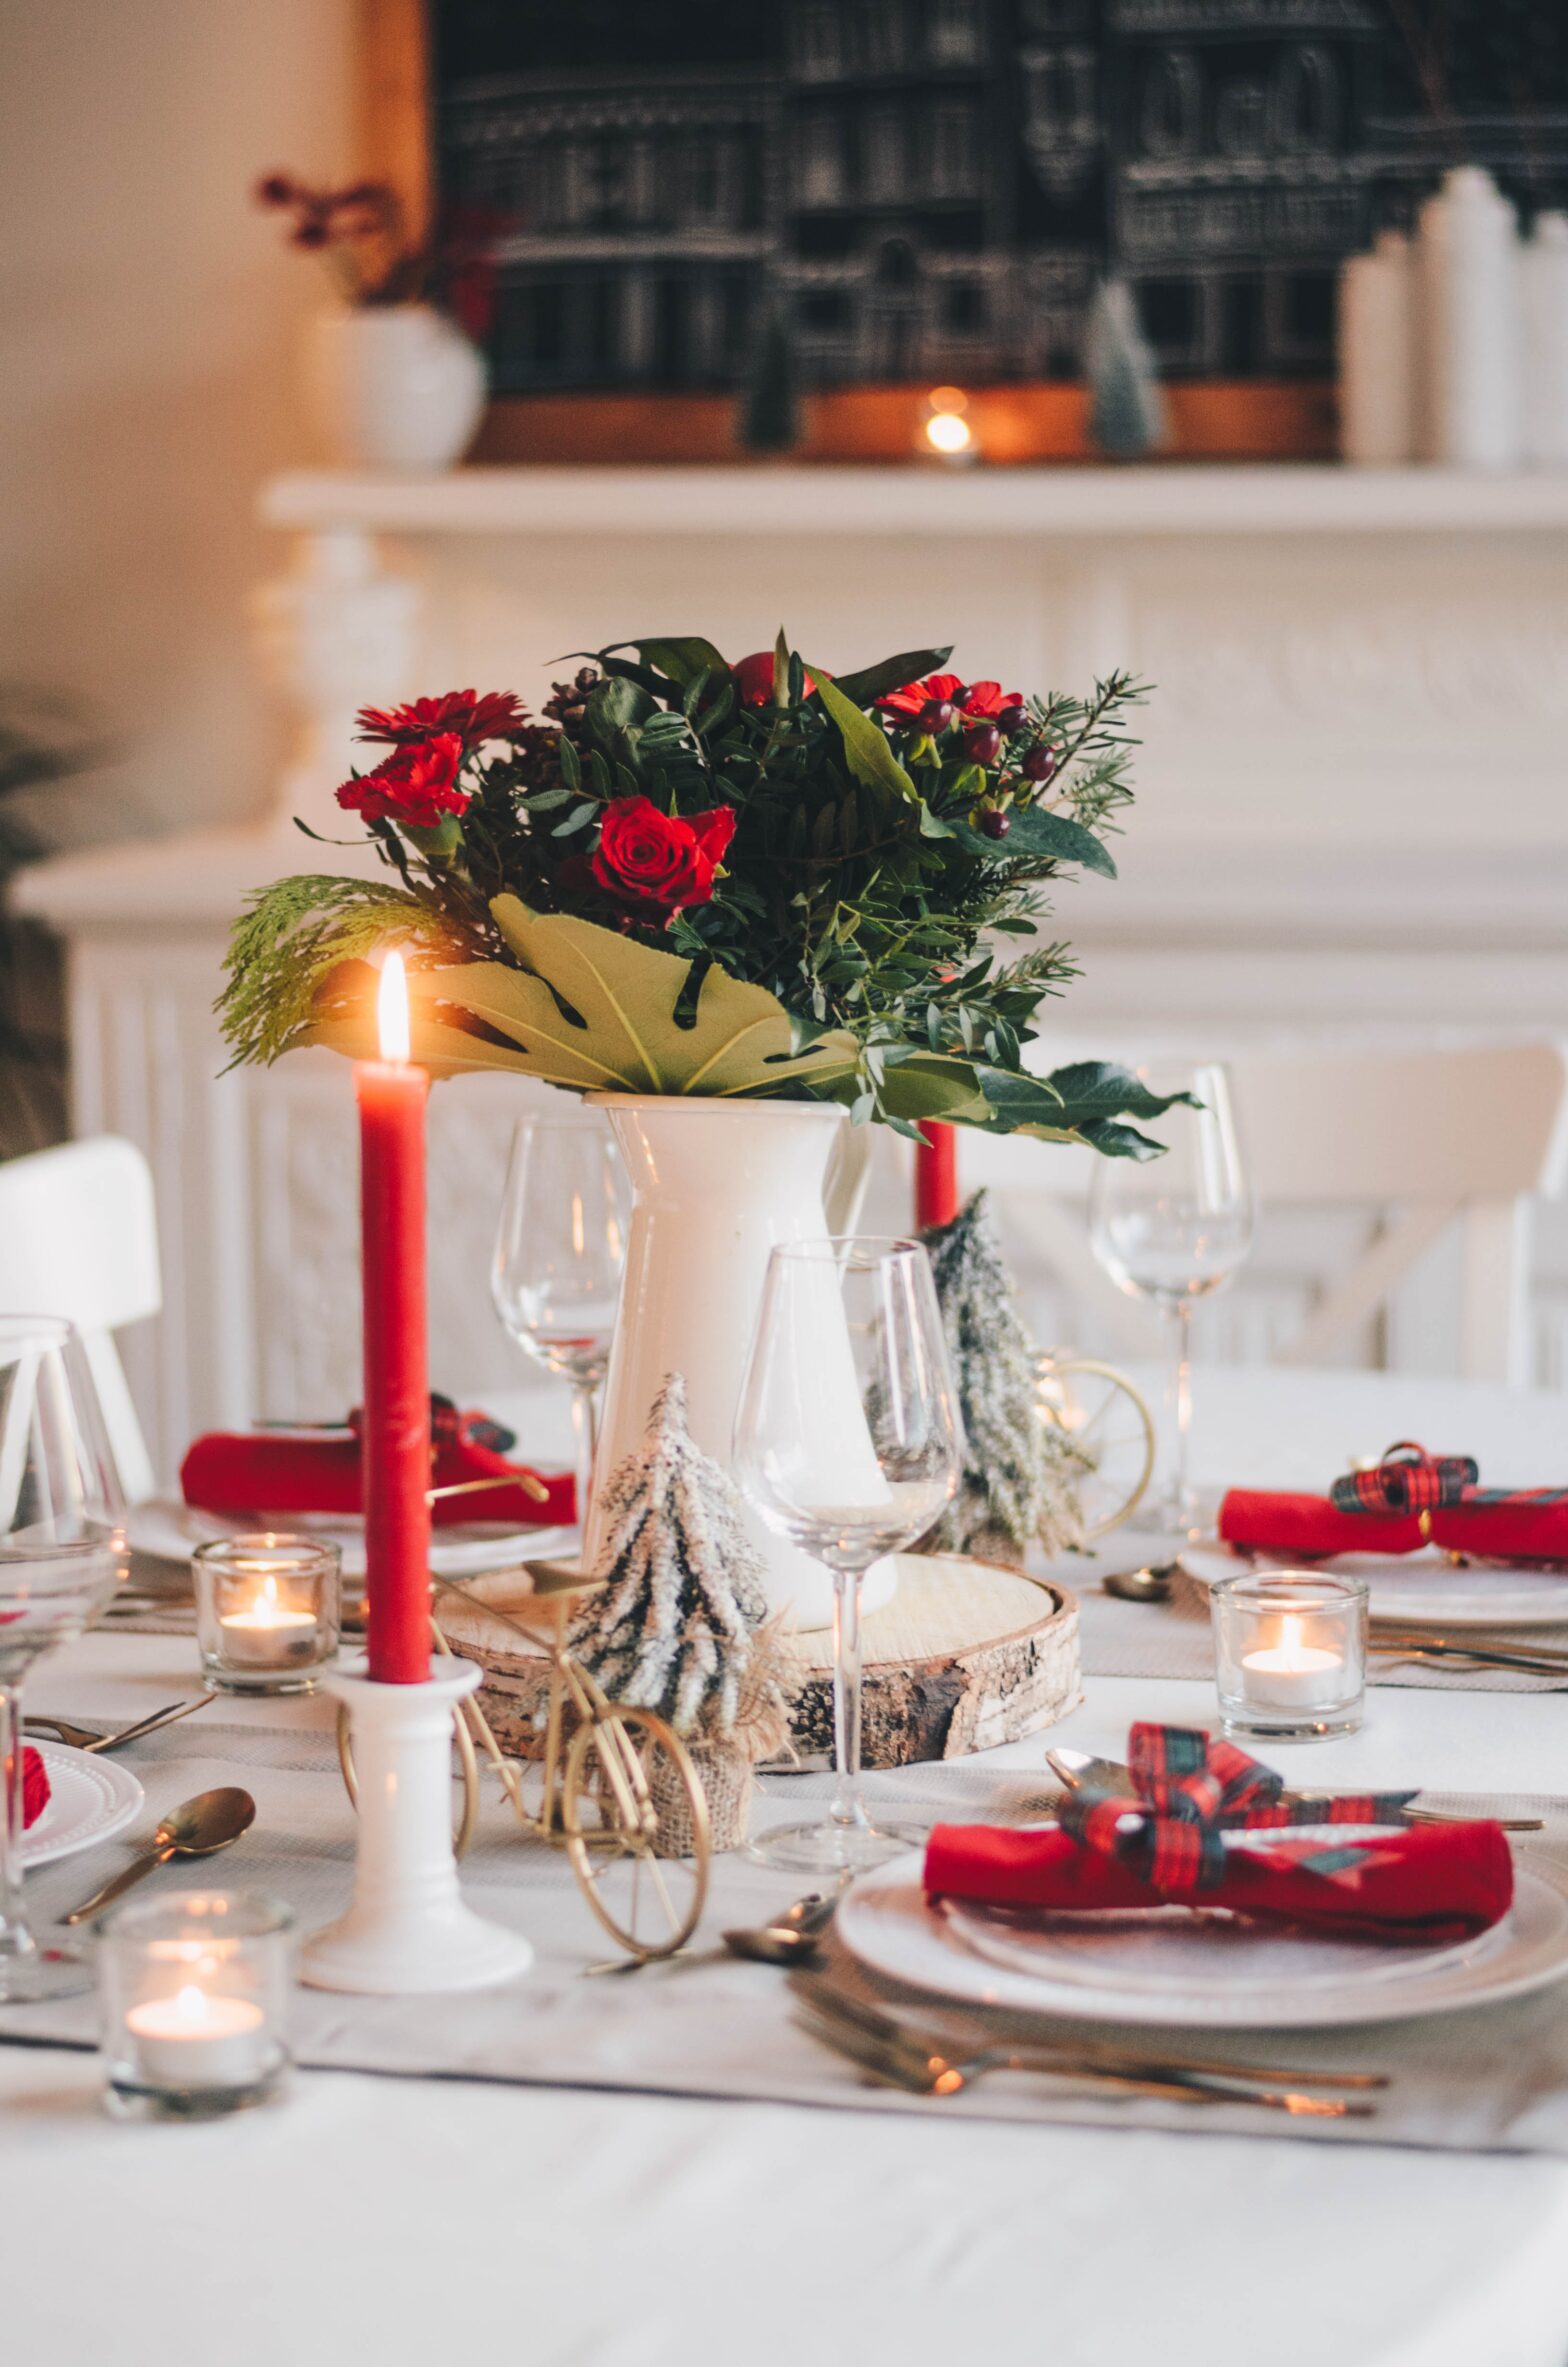 What are some of the essential tips for making successful Christmas parties in the office?